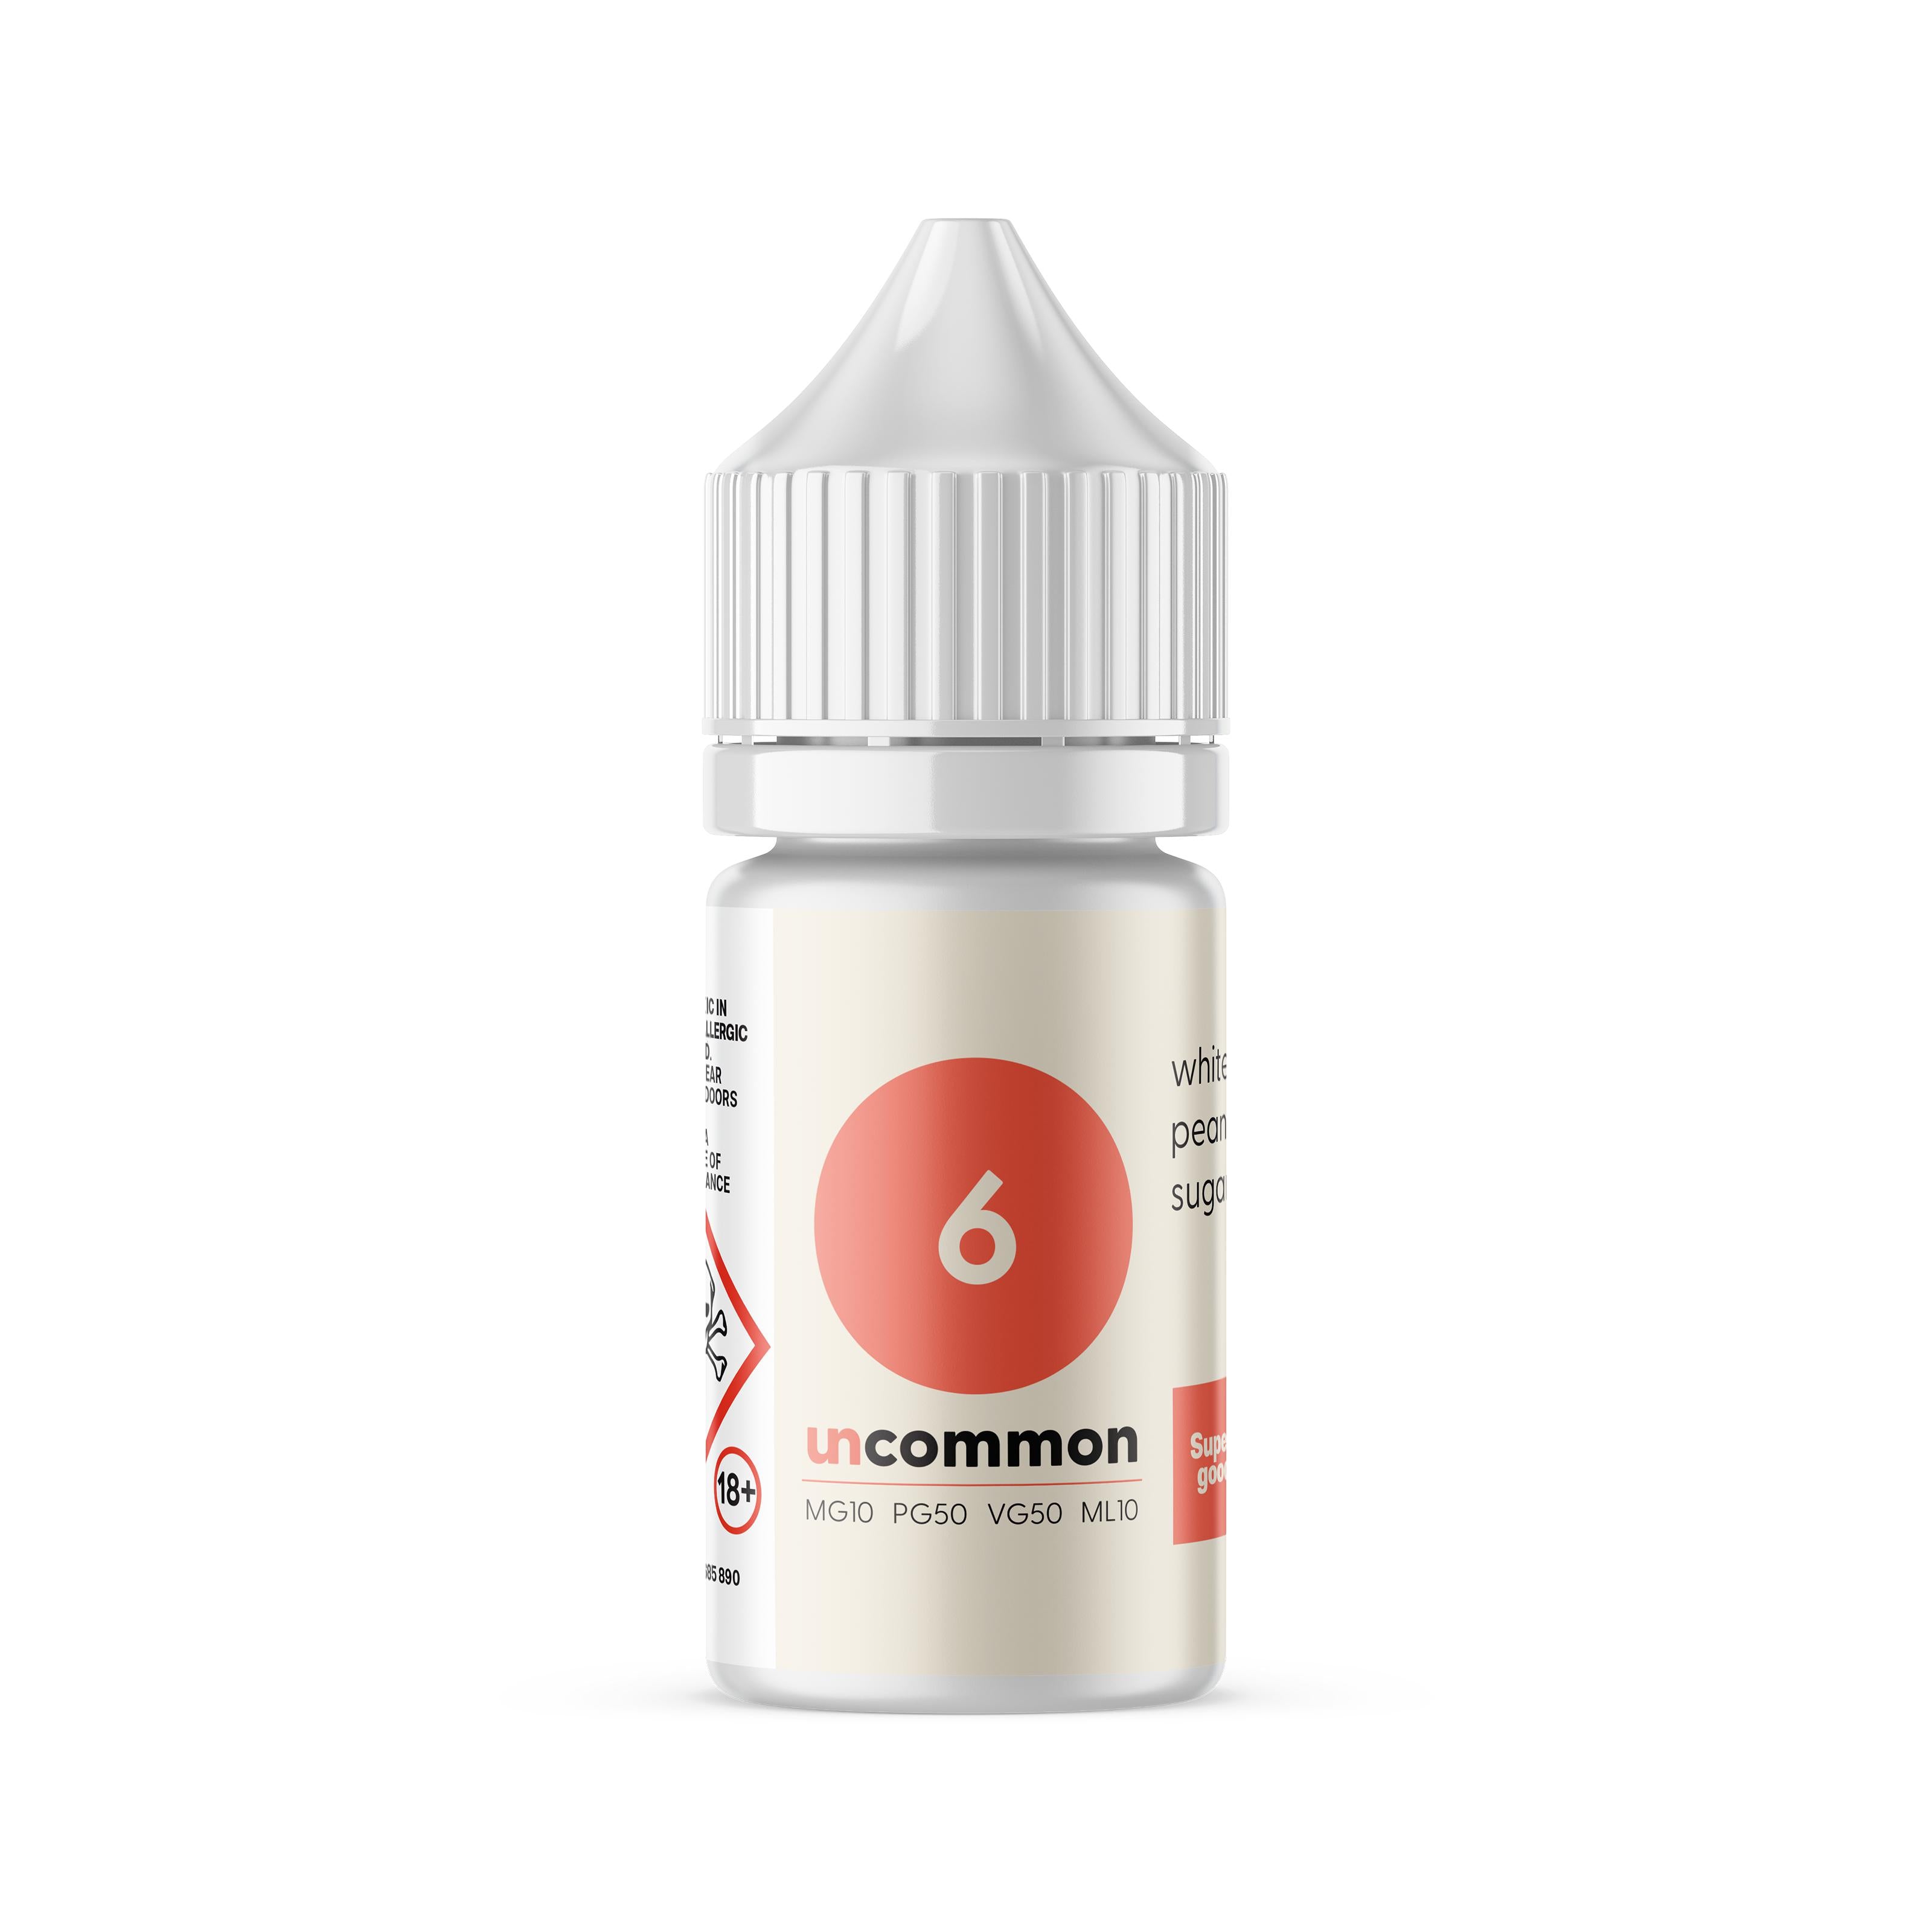 uncommon 6 by Supergood x Grimm Green - 10ml